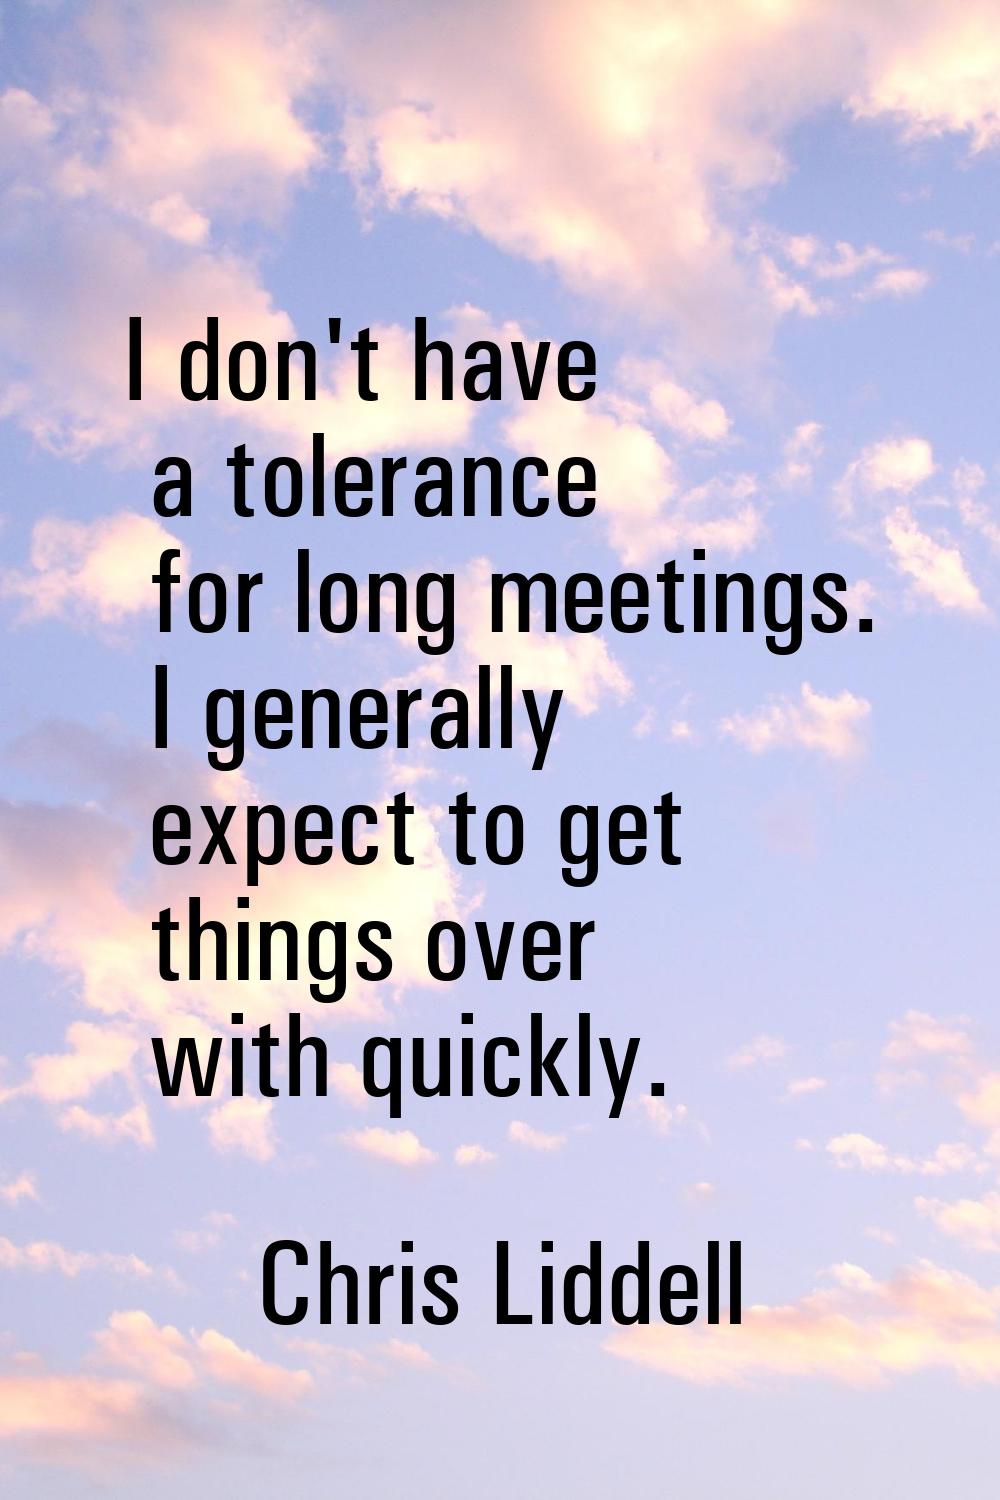 I don't have a tolerance for long meetings. I generally expect to get things over with quickly.